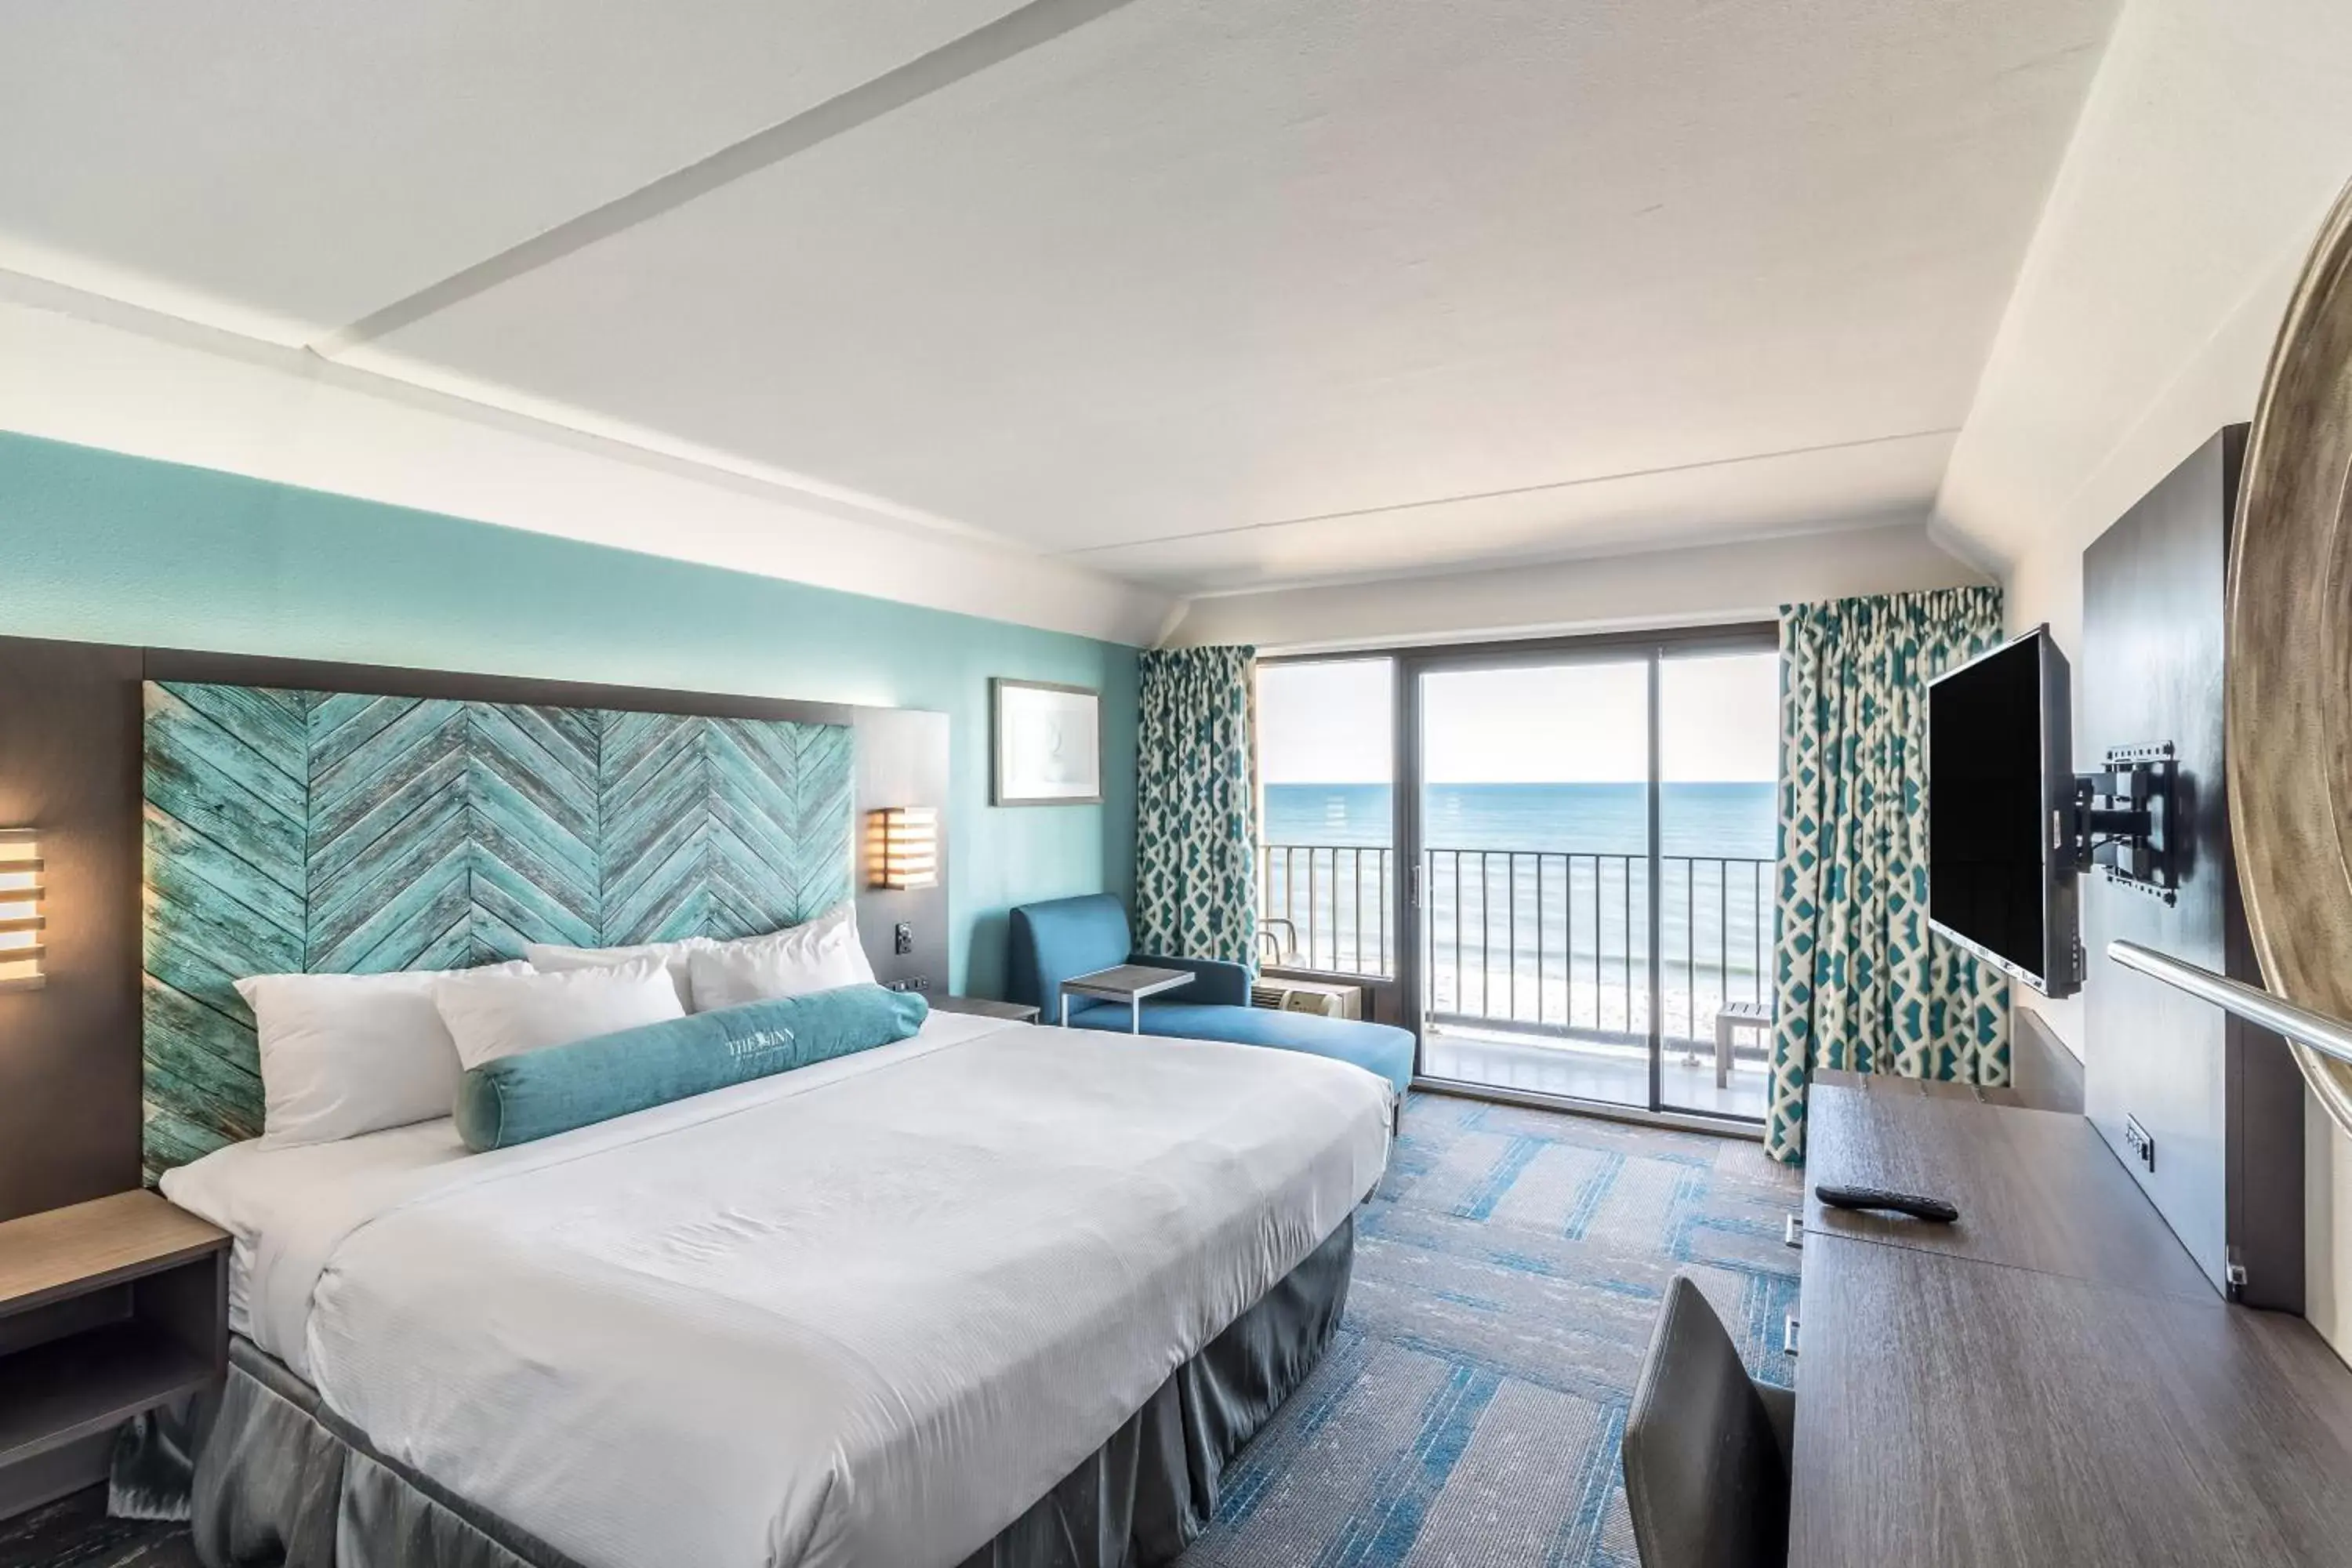 Sea view in The Inn at Pine Knoll Shores Oceanfront